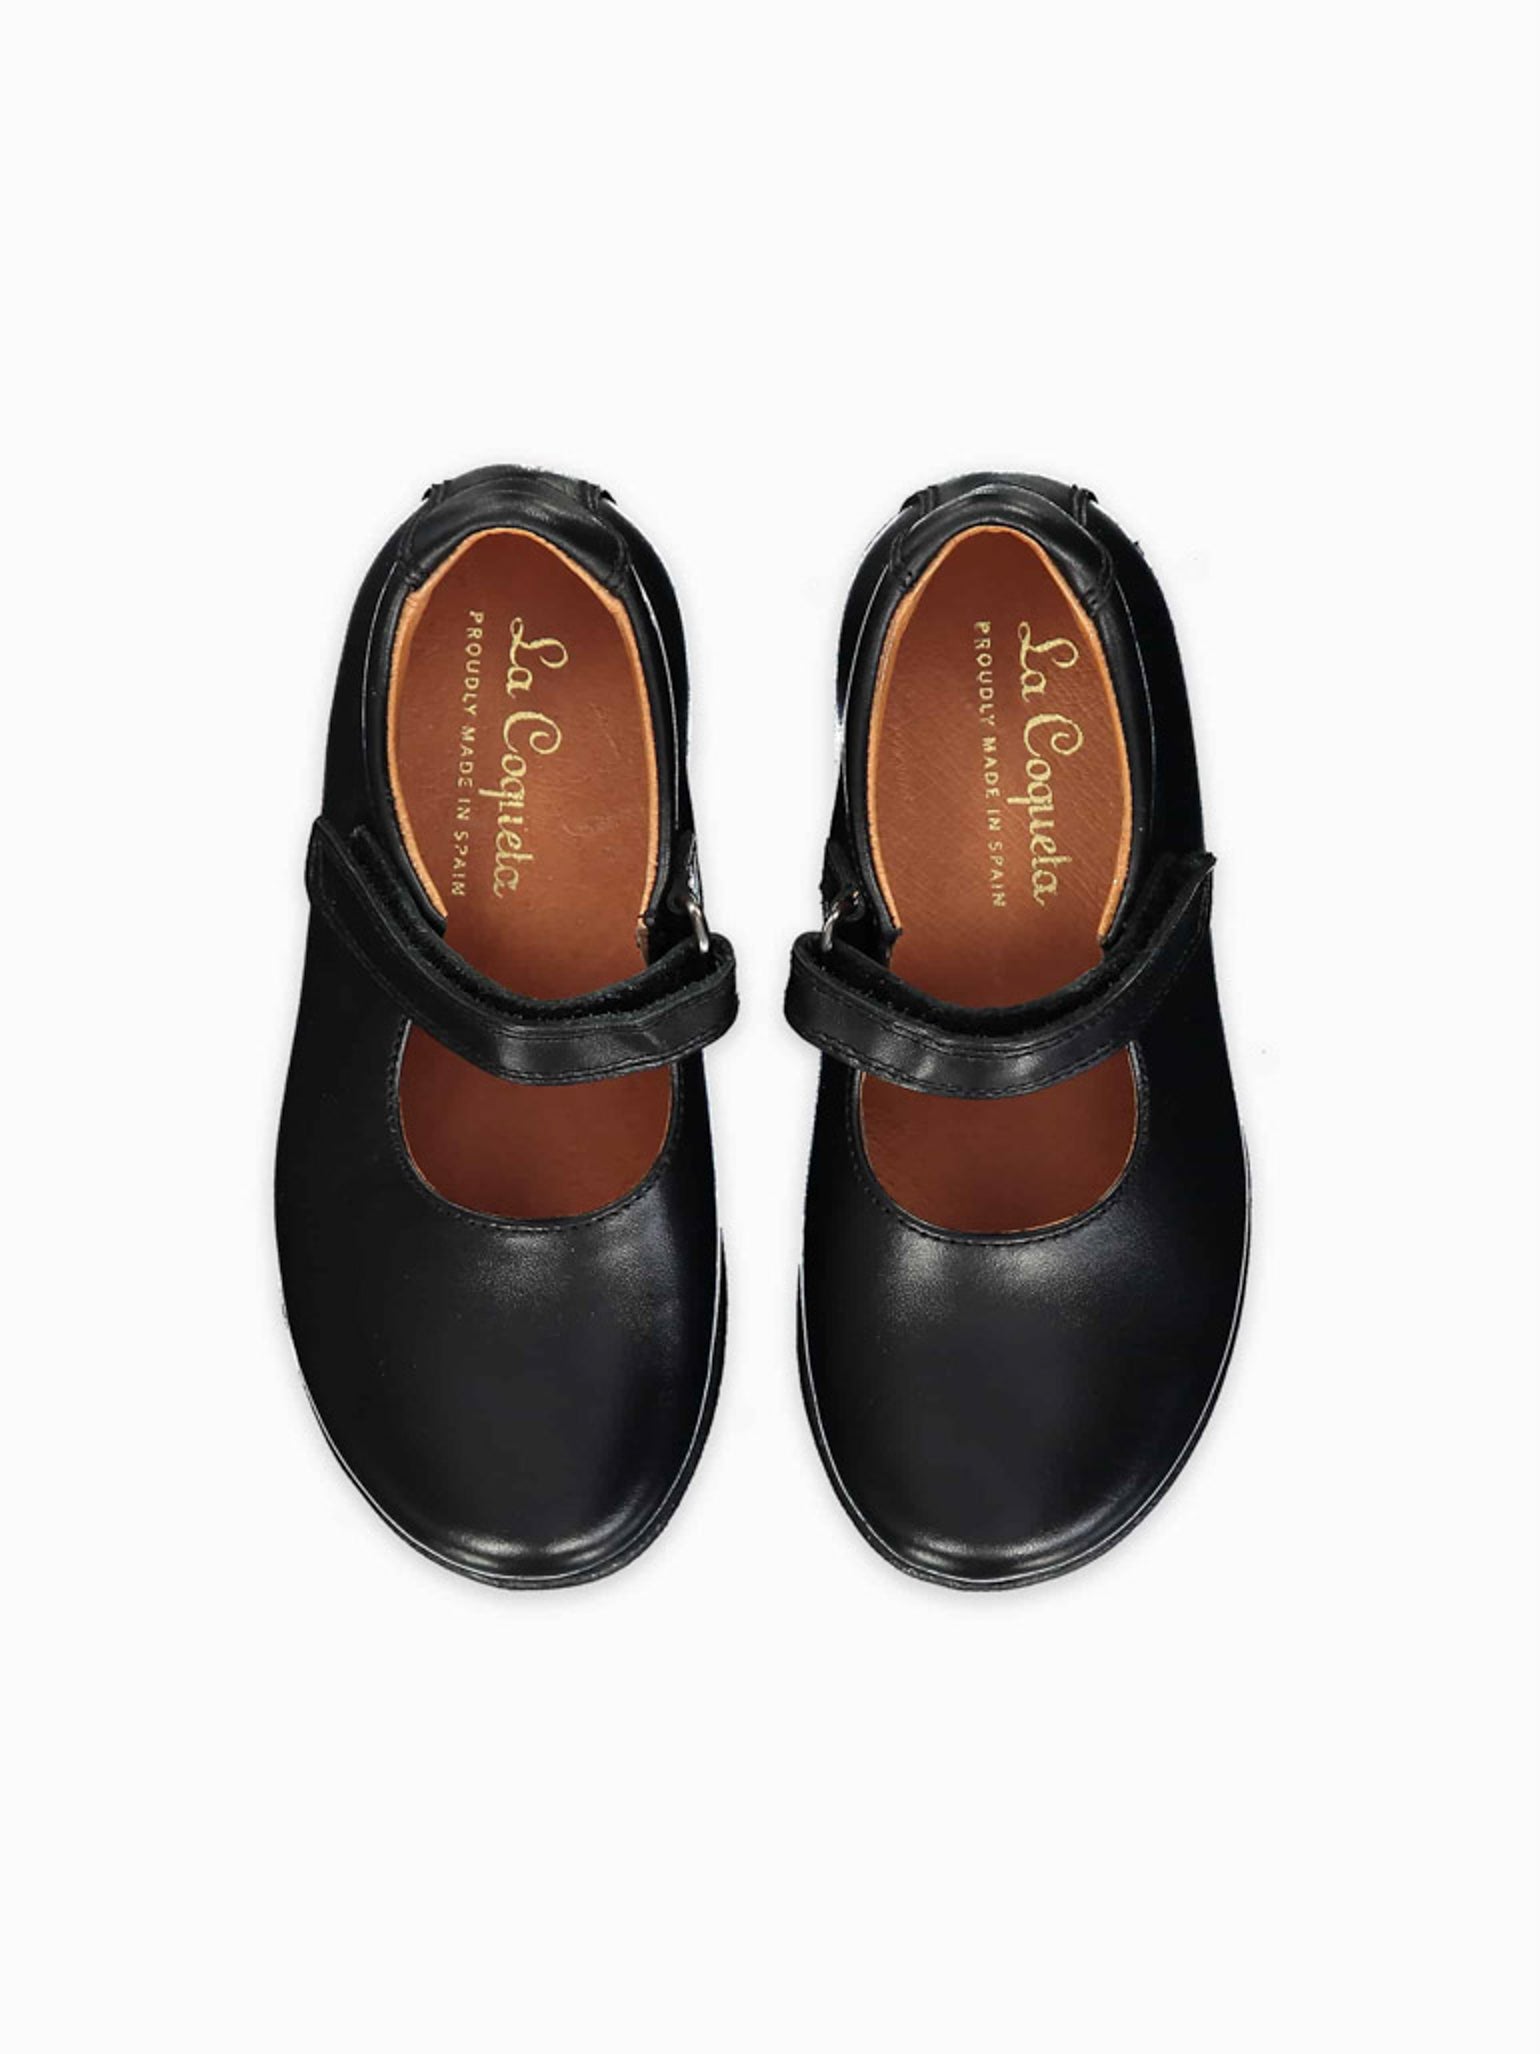 Black Leather Girl Classic School Shoes